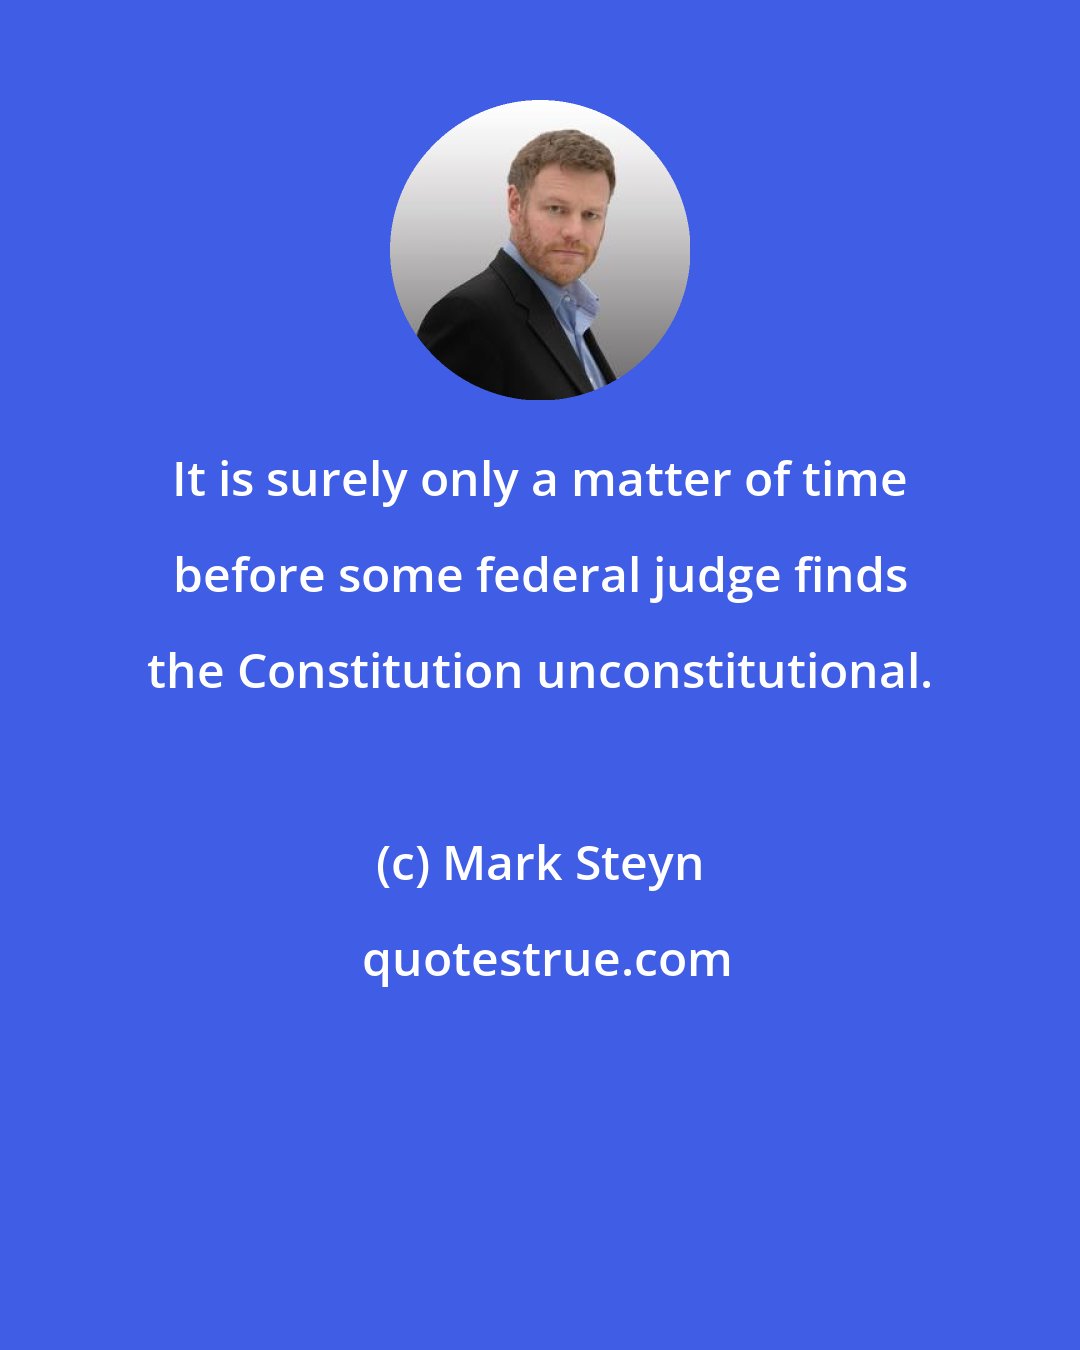 Mark Steyn: It is surely only a matter of time before some federal judge finds the Constitution unconstitutional.